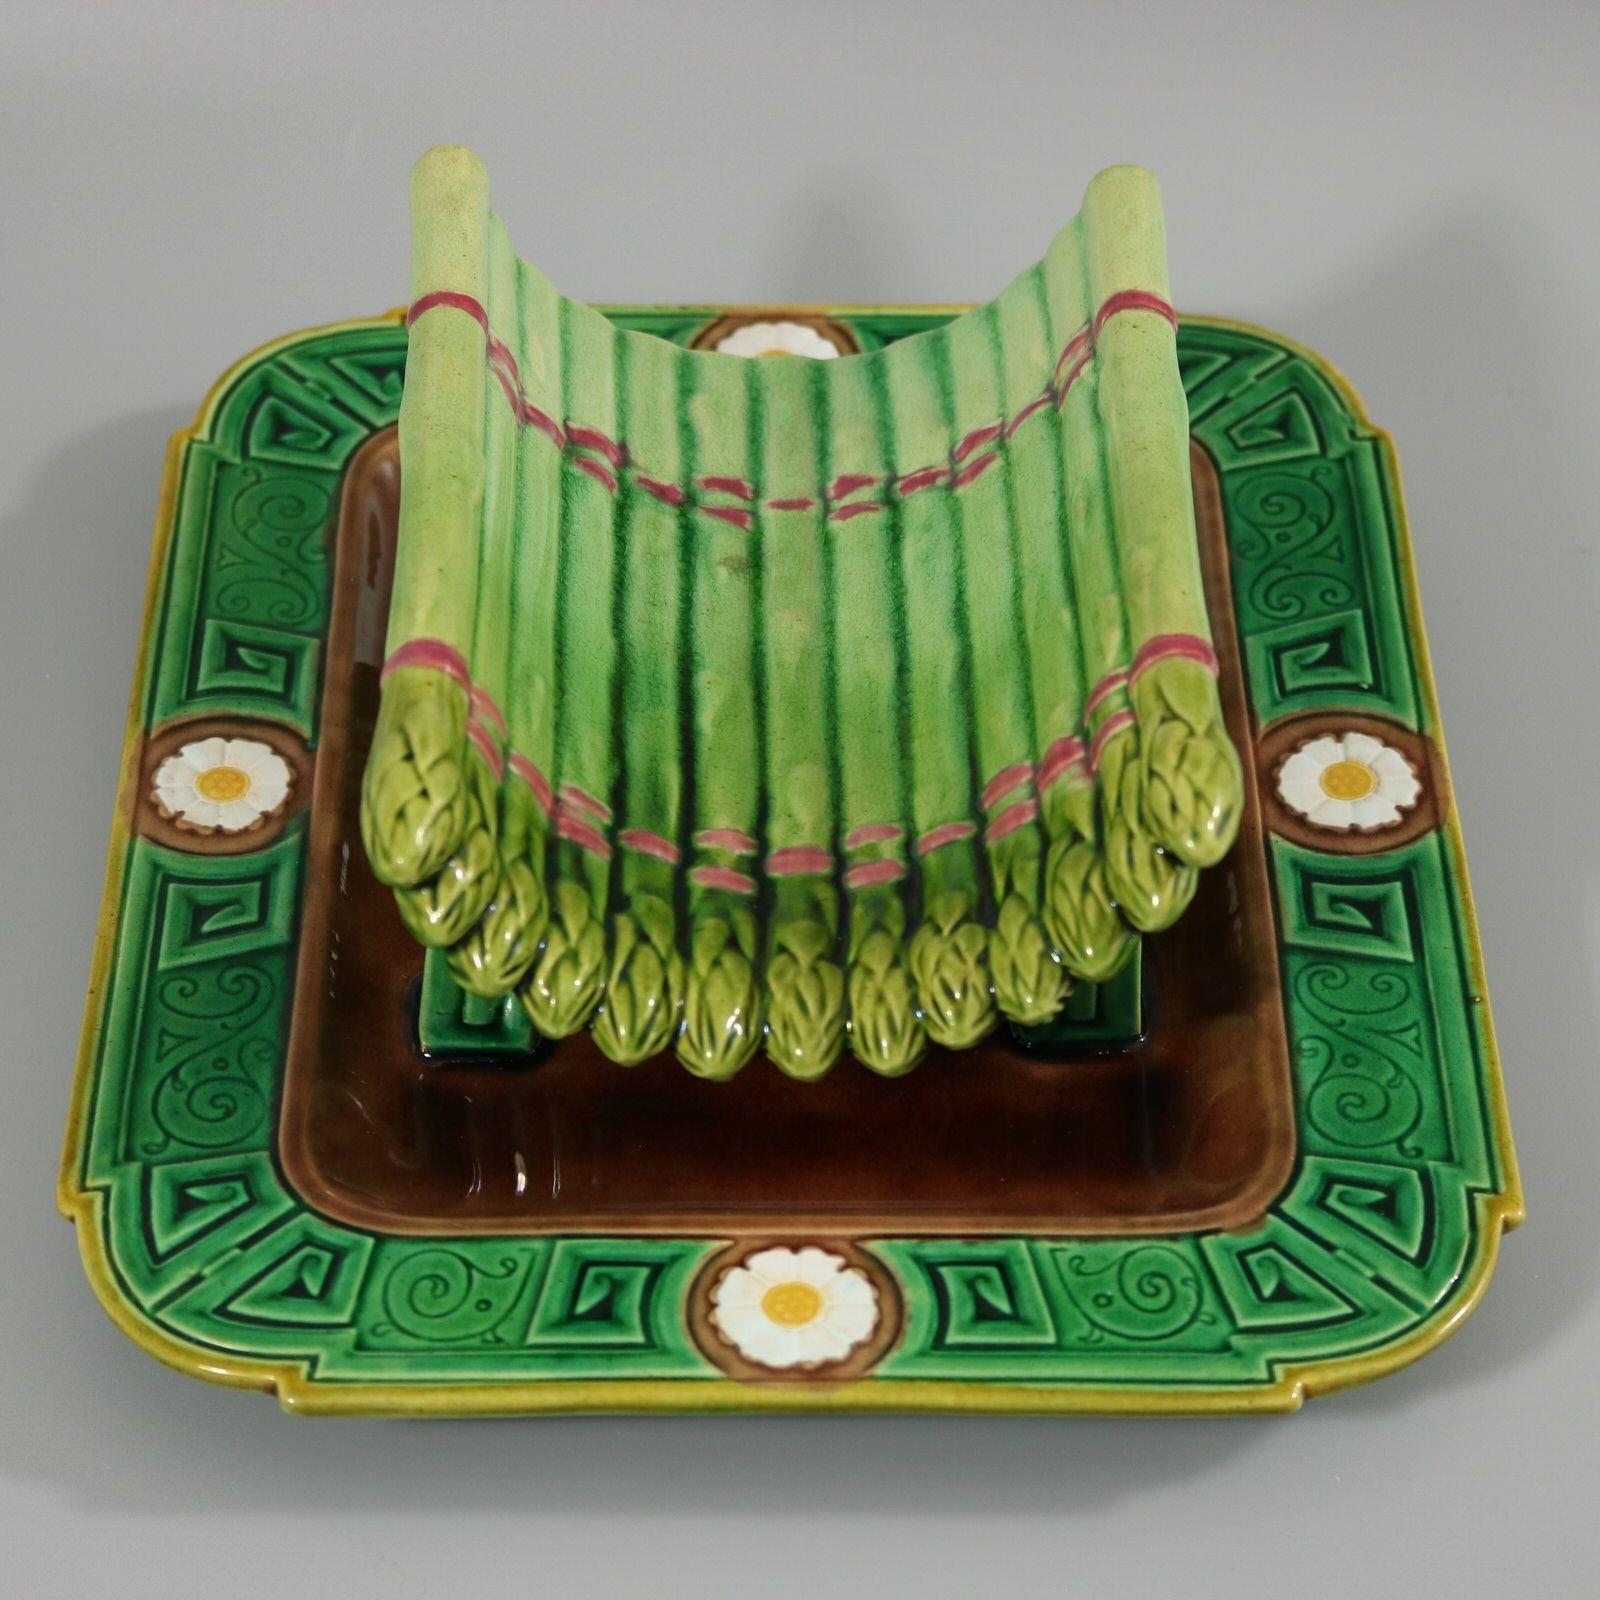 Minton Majolica asparagus drainer which features asparagus tips bound together, sat on a rectangular tray. Flowers and geometric patterns to the border. Colouration: green, brown, white, are predominant. The piece bears maker's marks for the Minton